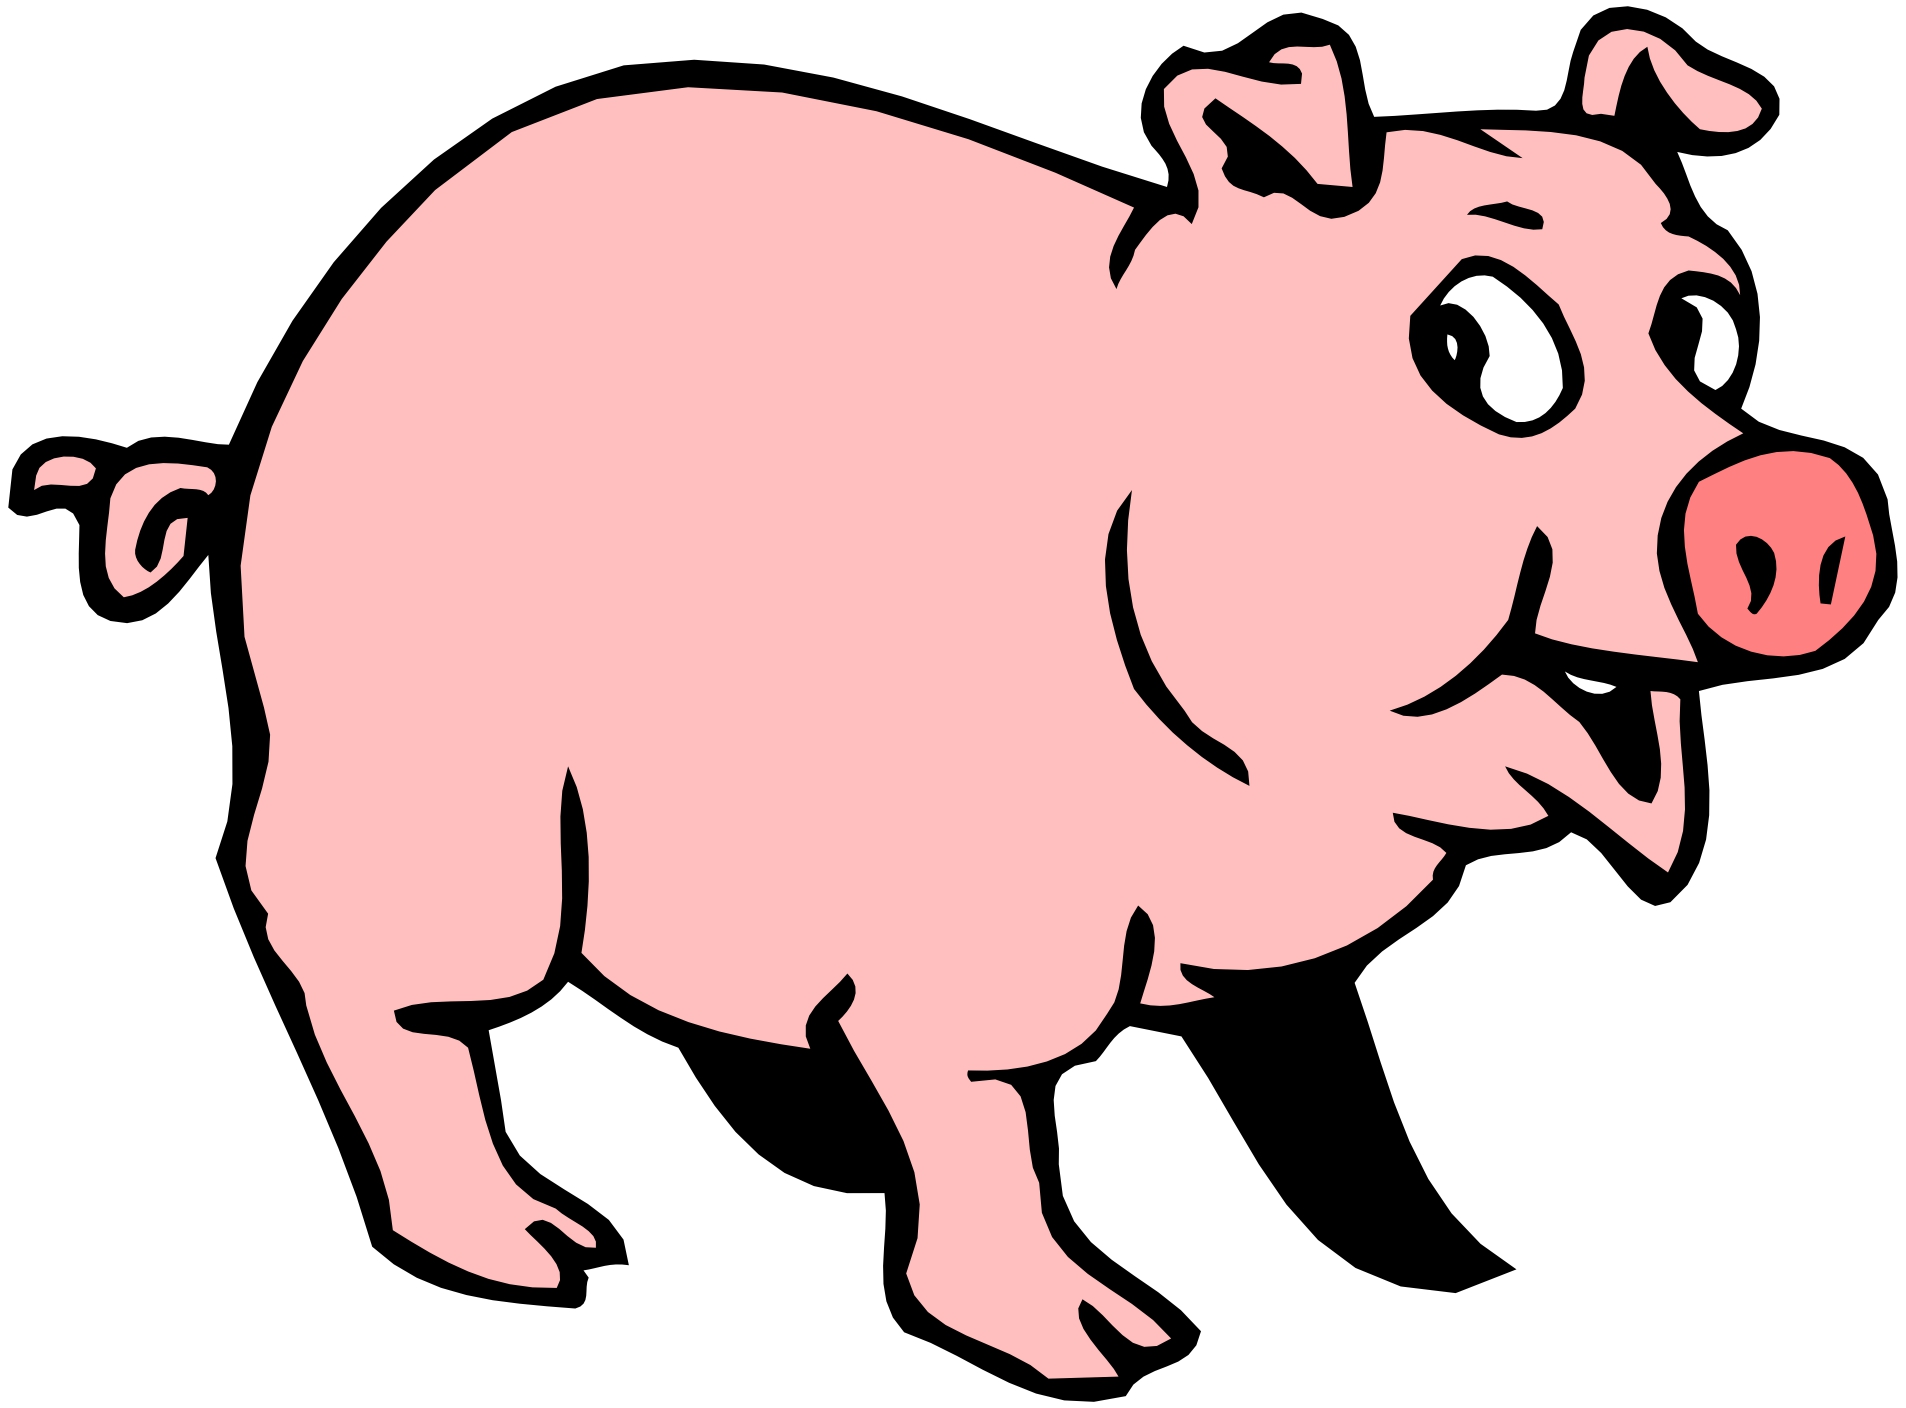 Cartoon Pig | Page 2 - Clipart library - Clipart library